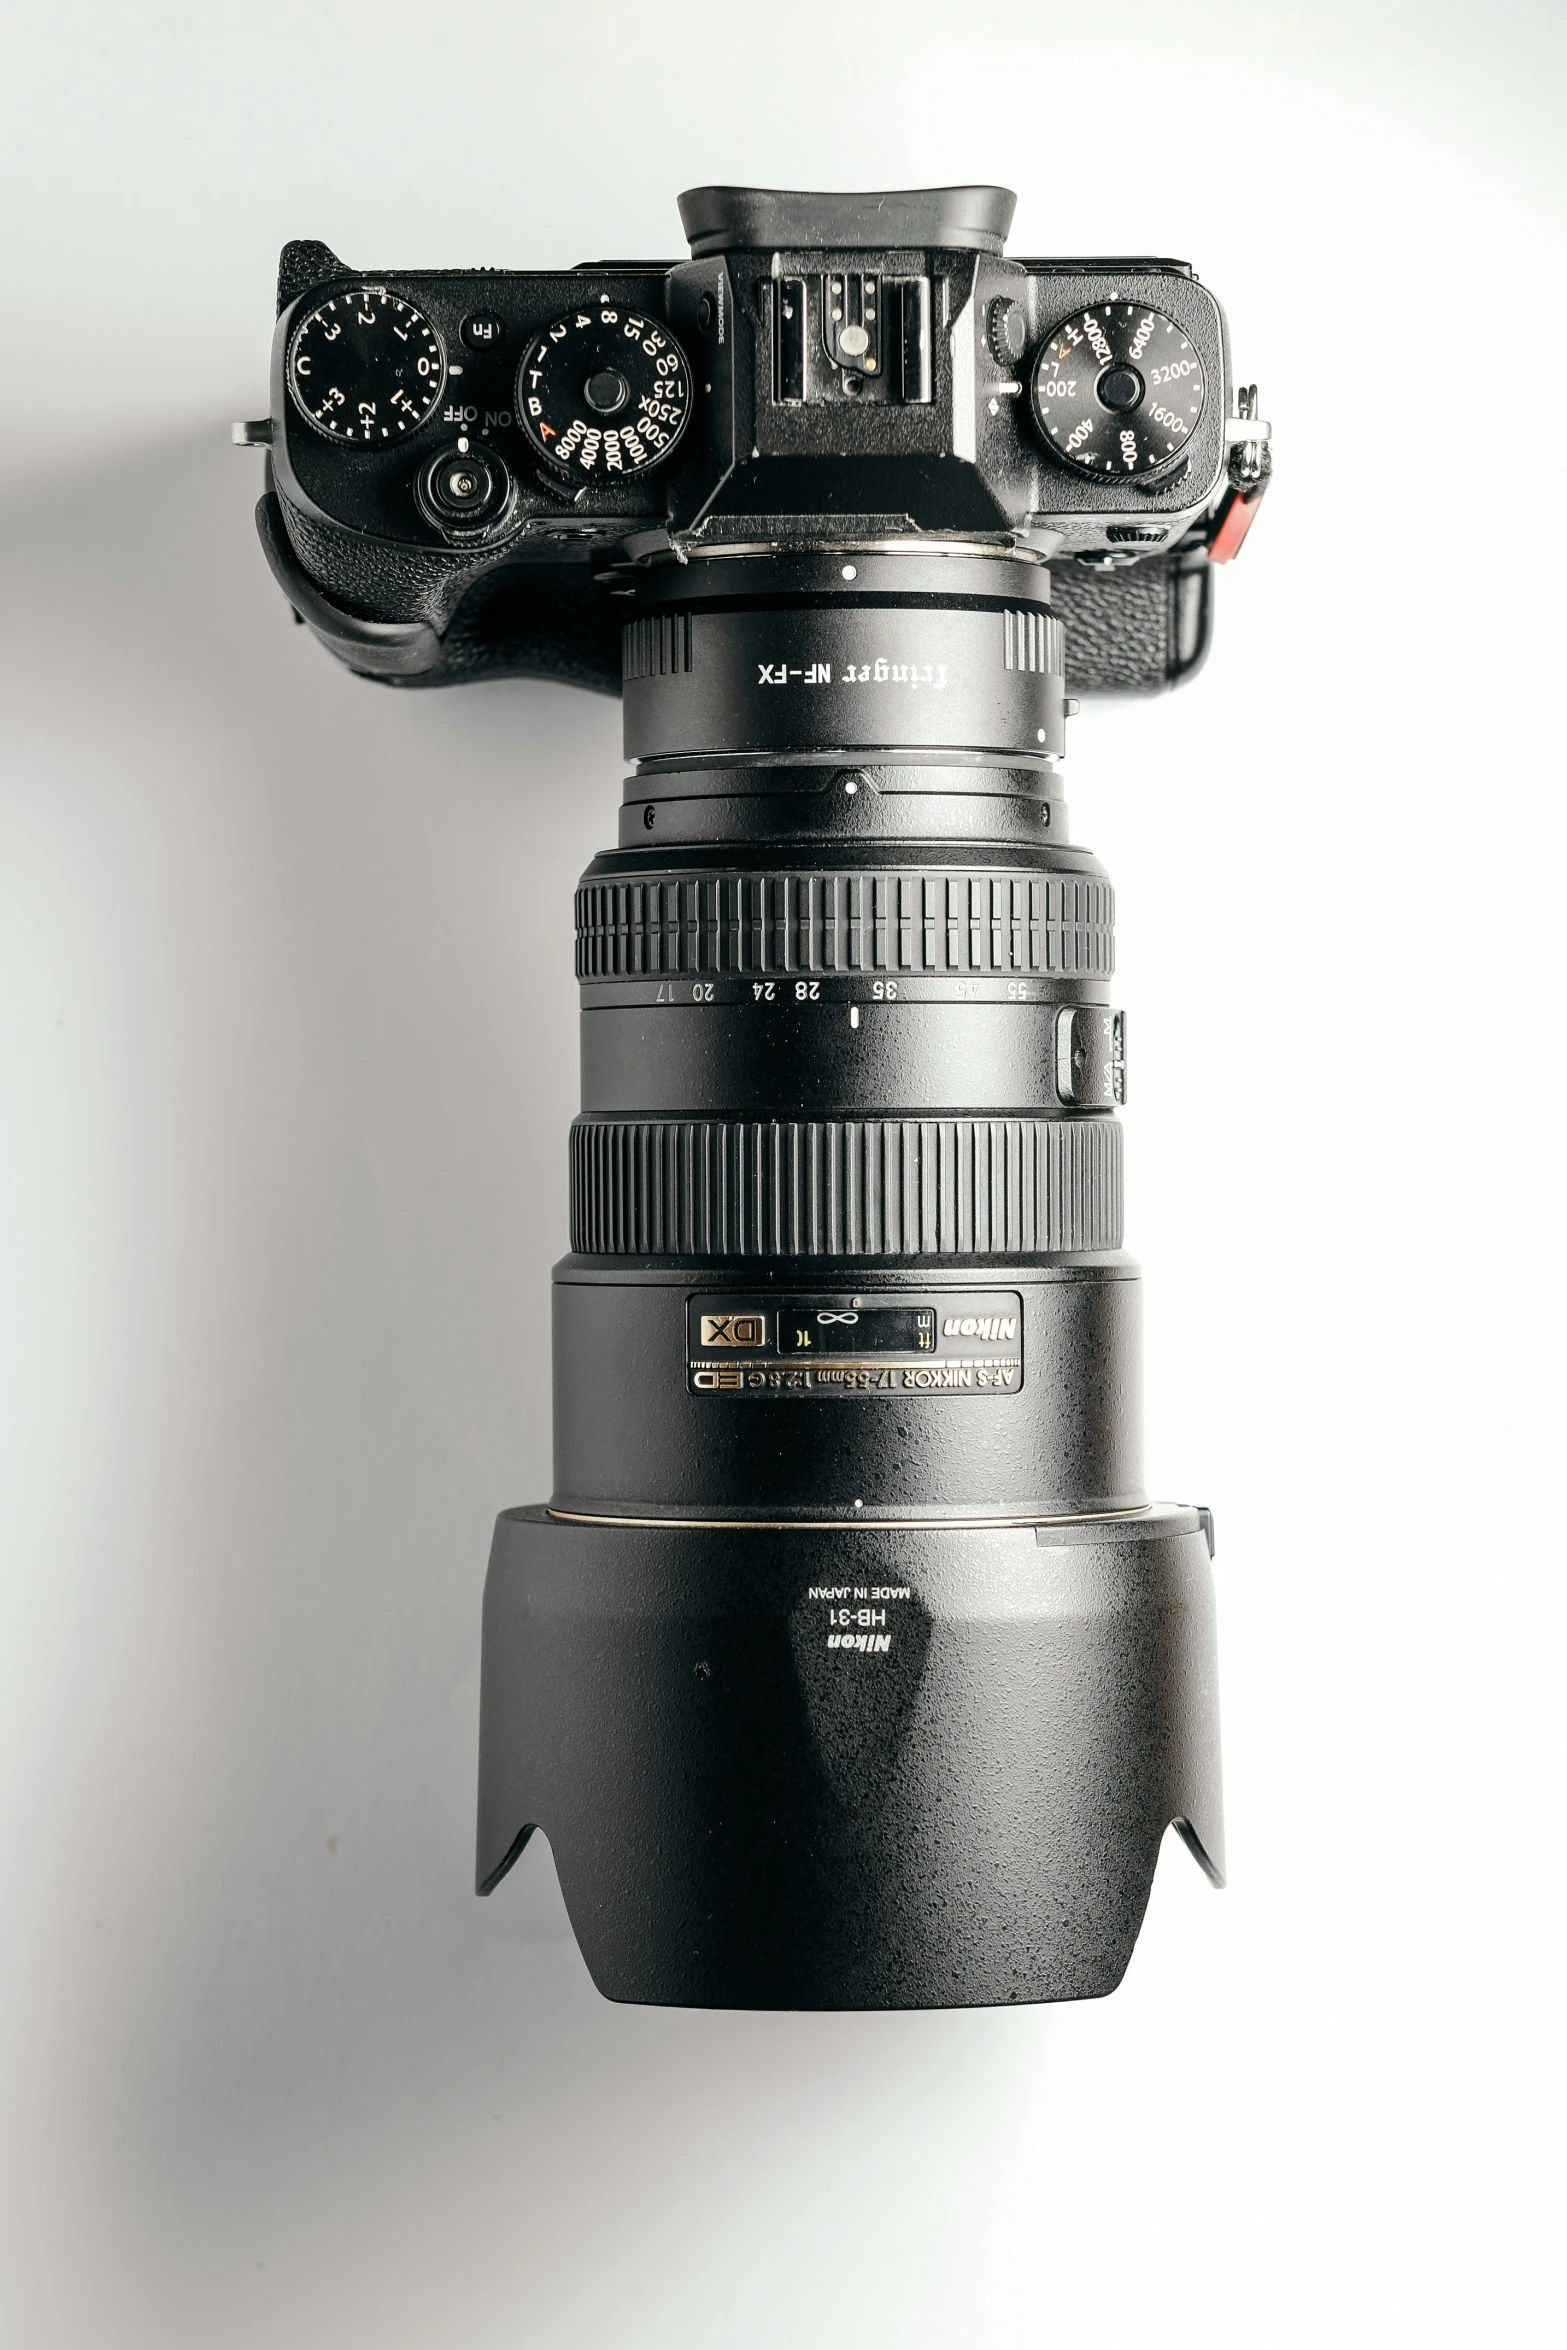 there is a zoom lens attached to the body of a camera